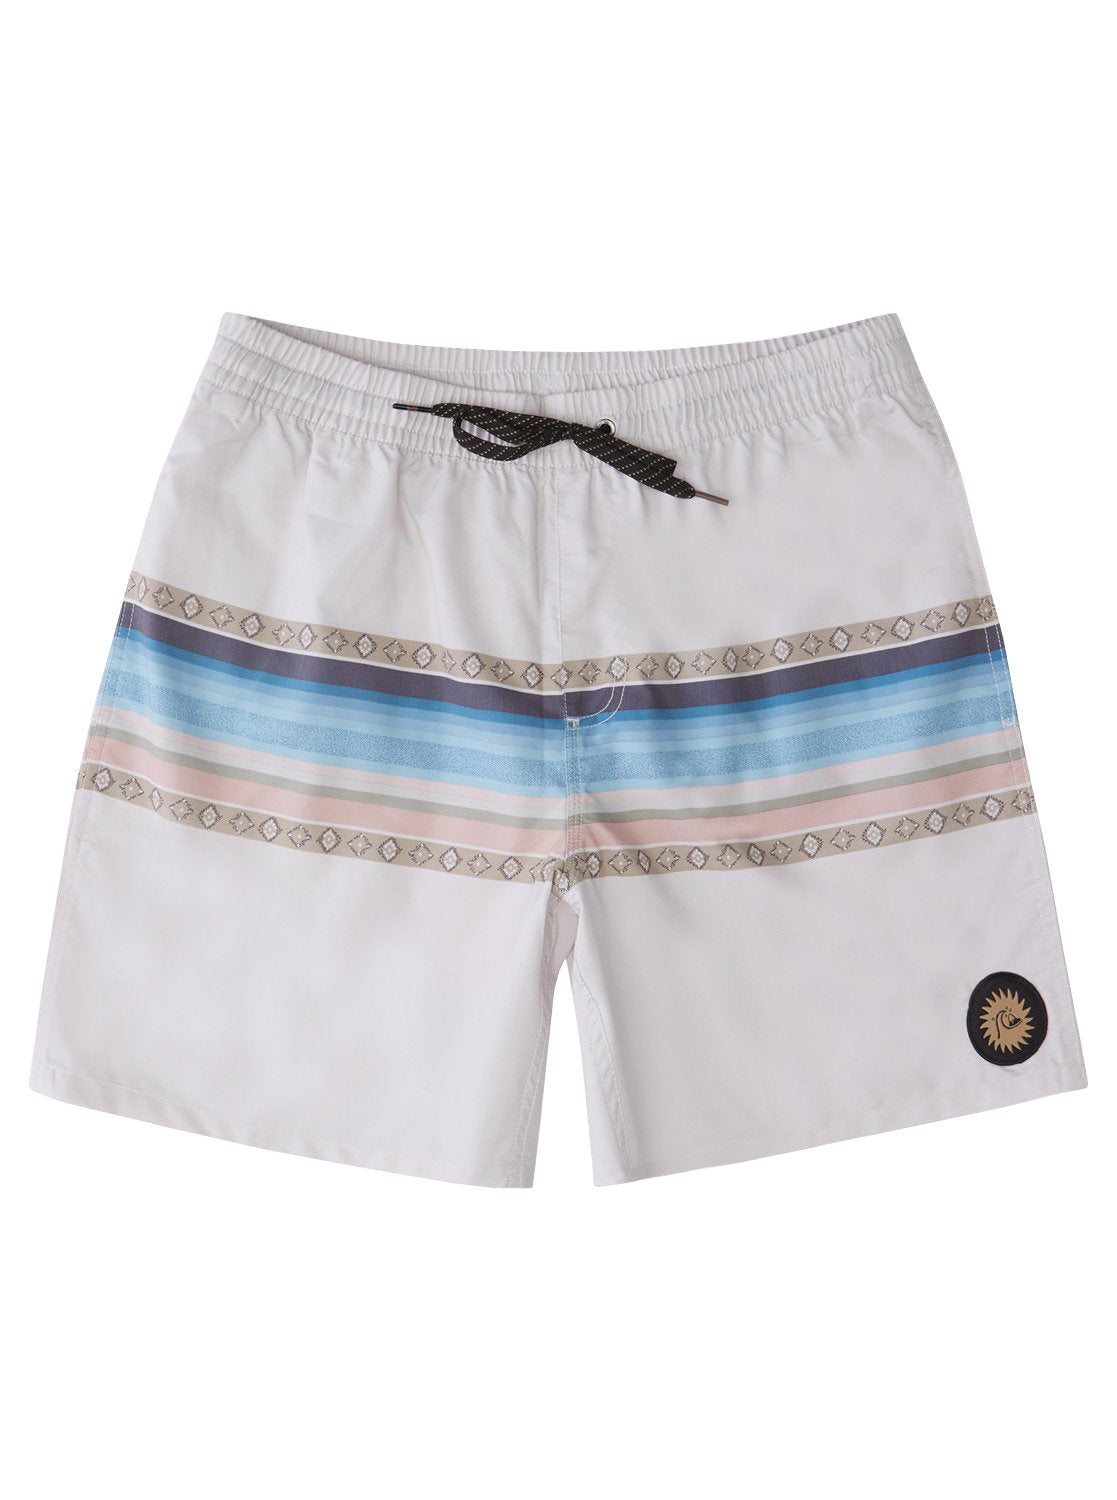 Quiksilver Sun Faded 17 Volley WCL6 S